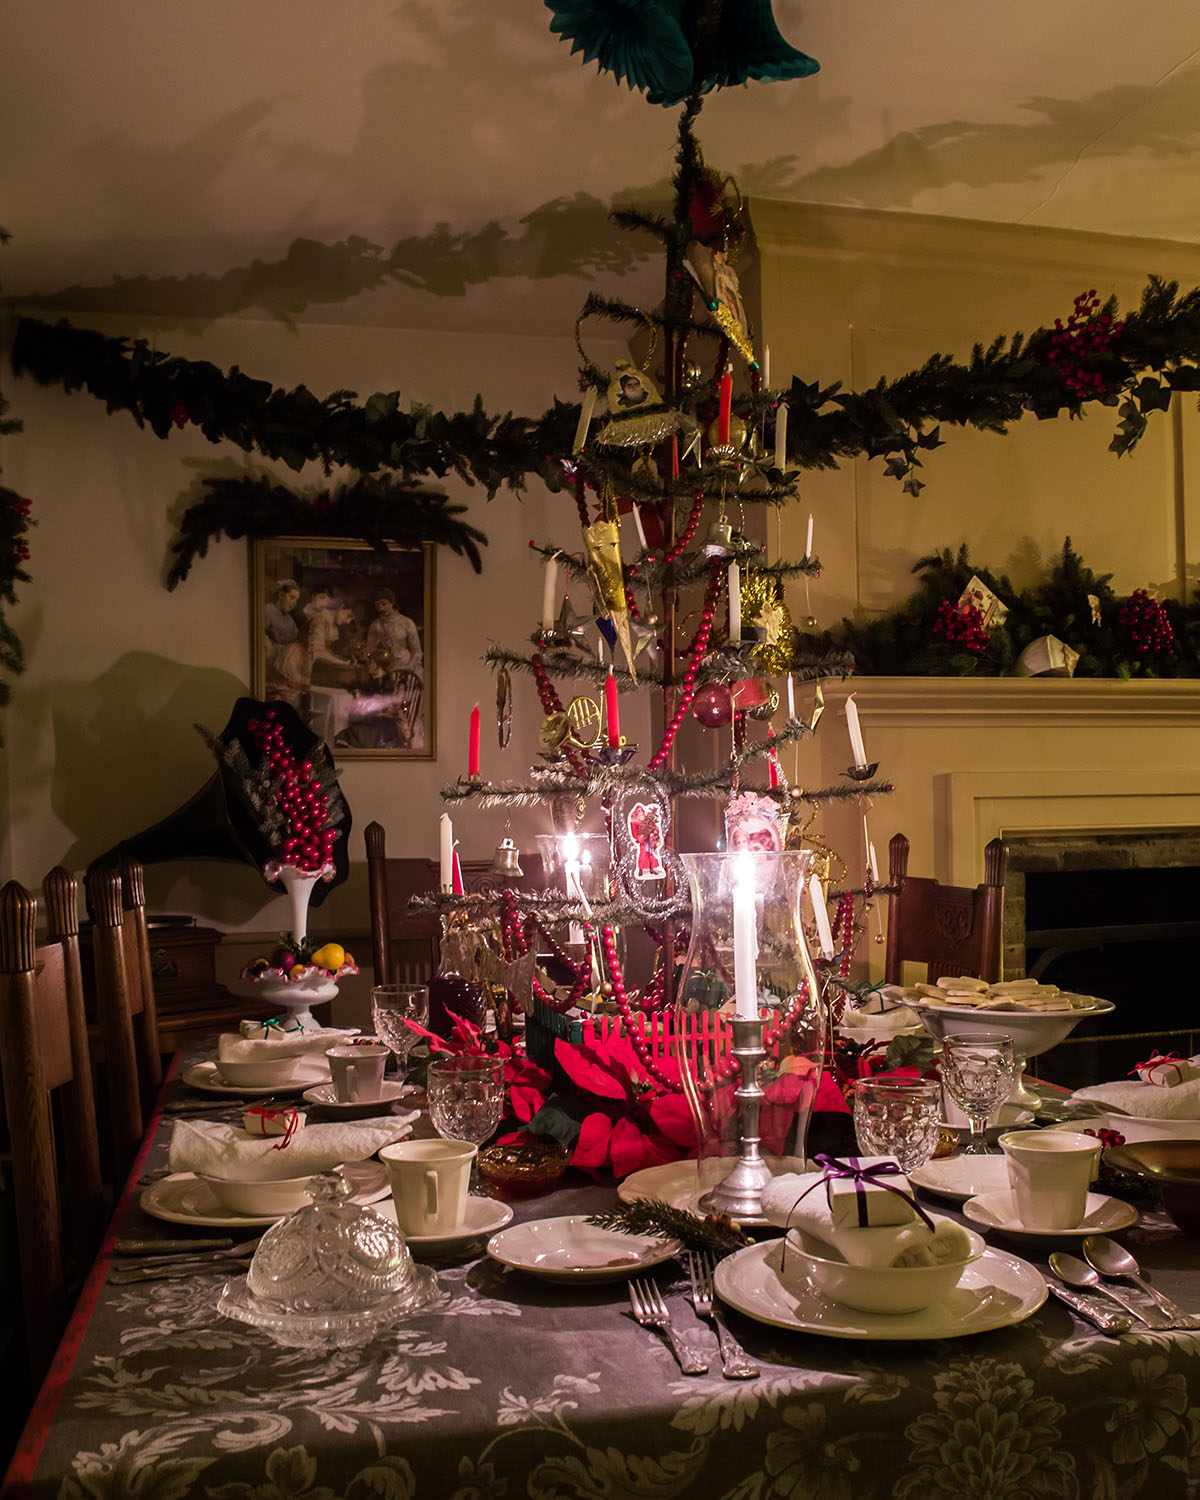 The dining table in the parlor of the Edison Homestead decorated for Christmas. THF Photography, 2015.